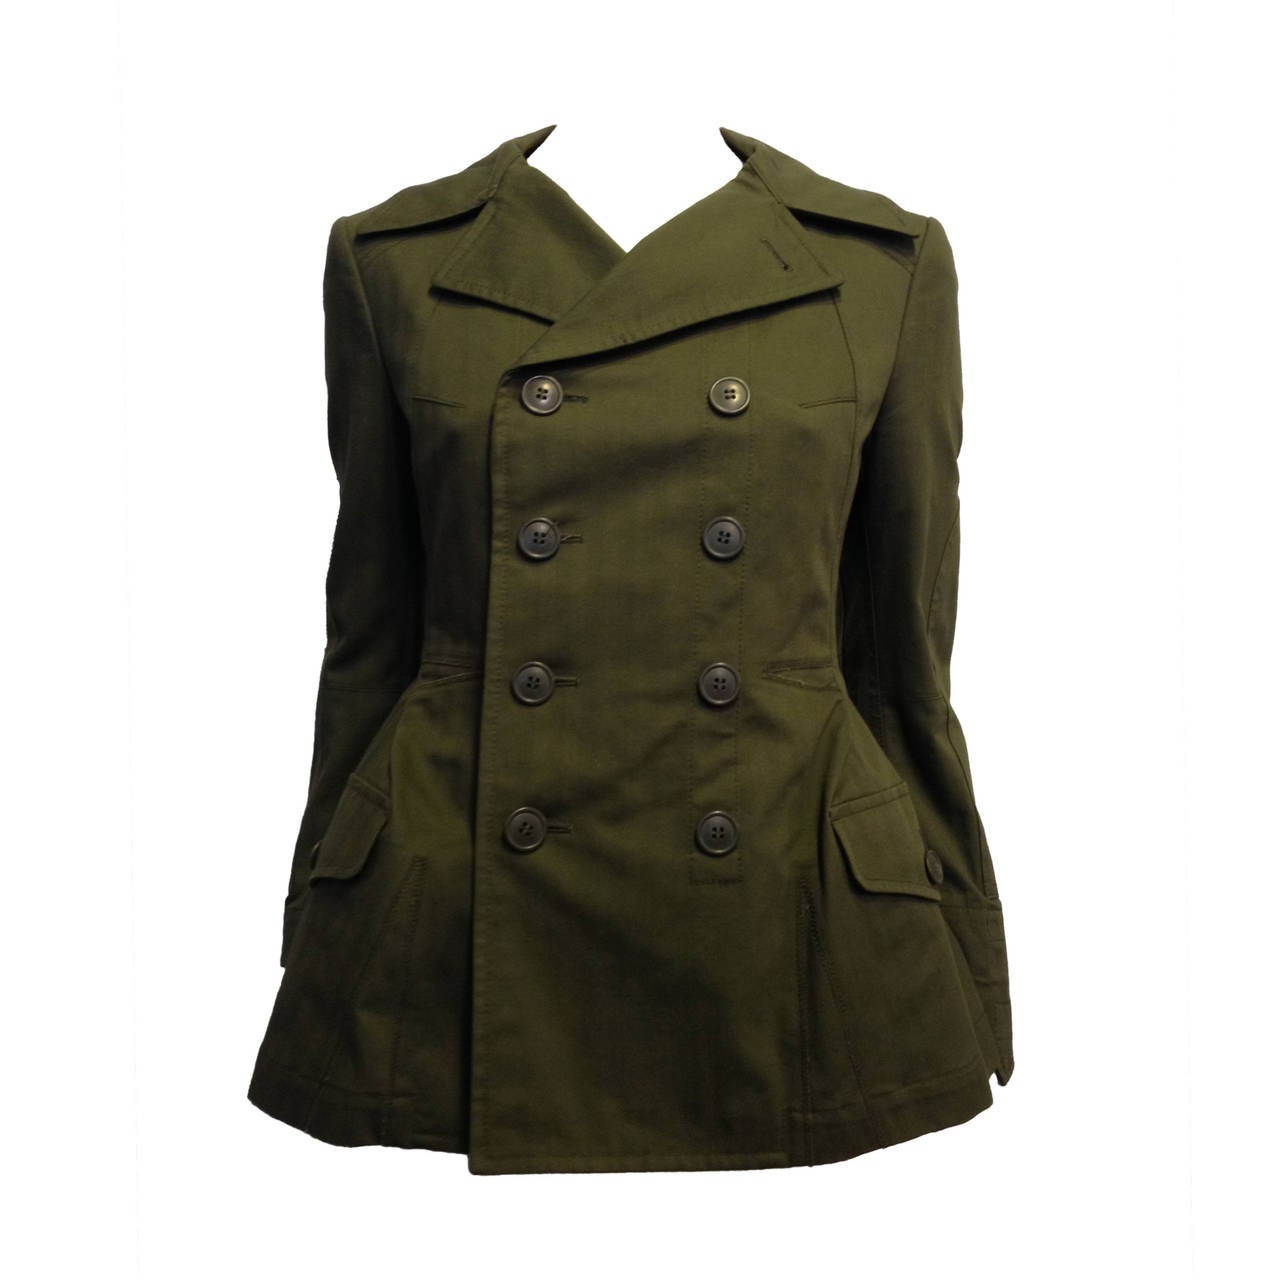 Junya Watanabe Comme des Garcons Olive Army Jacket